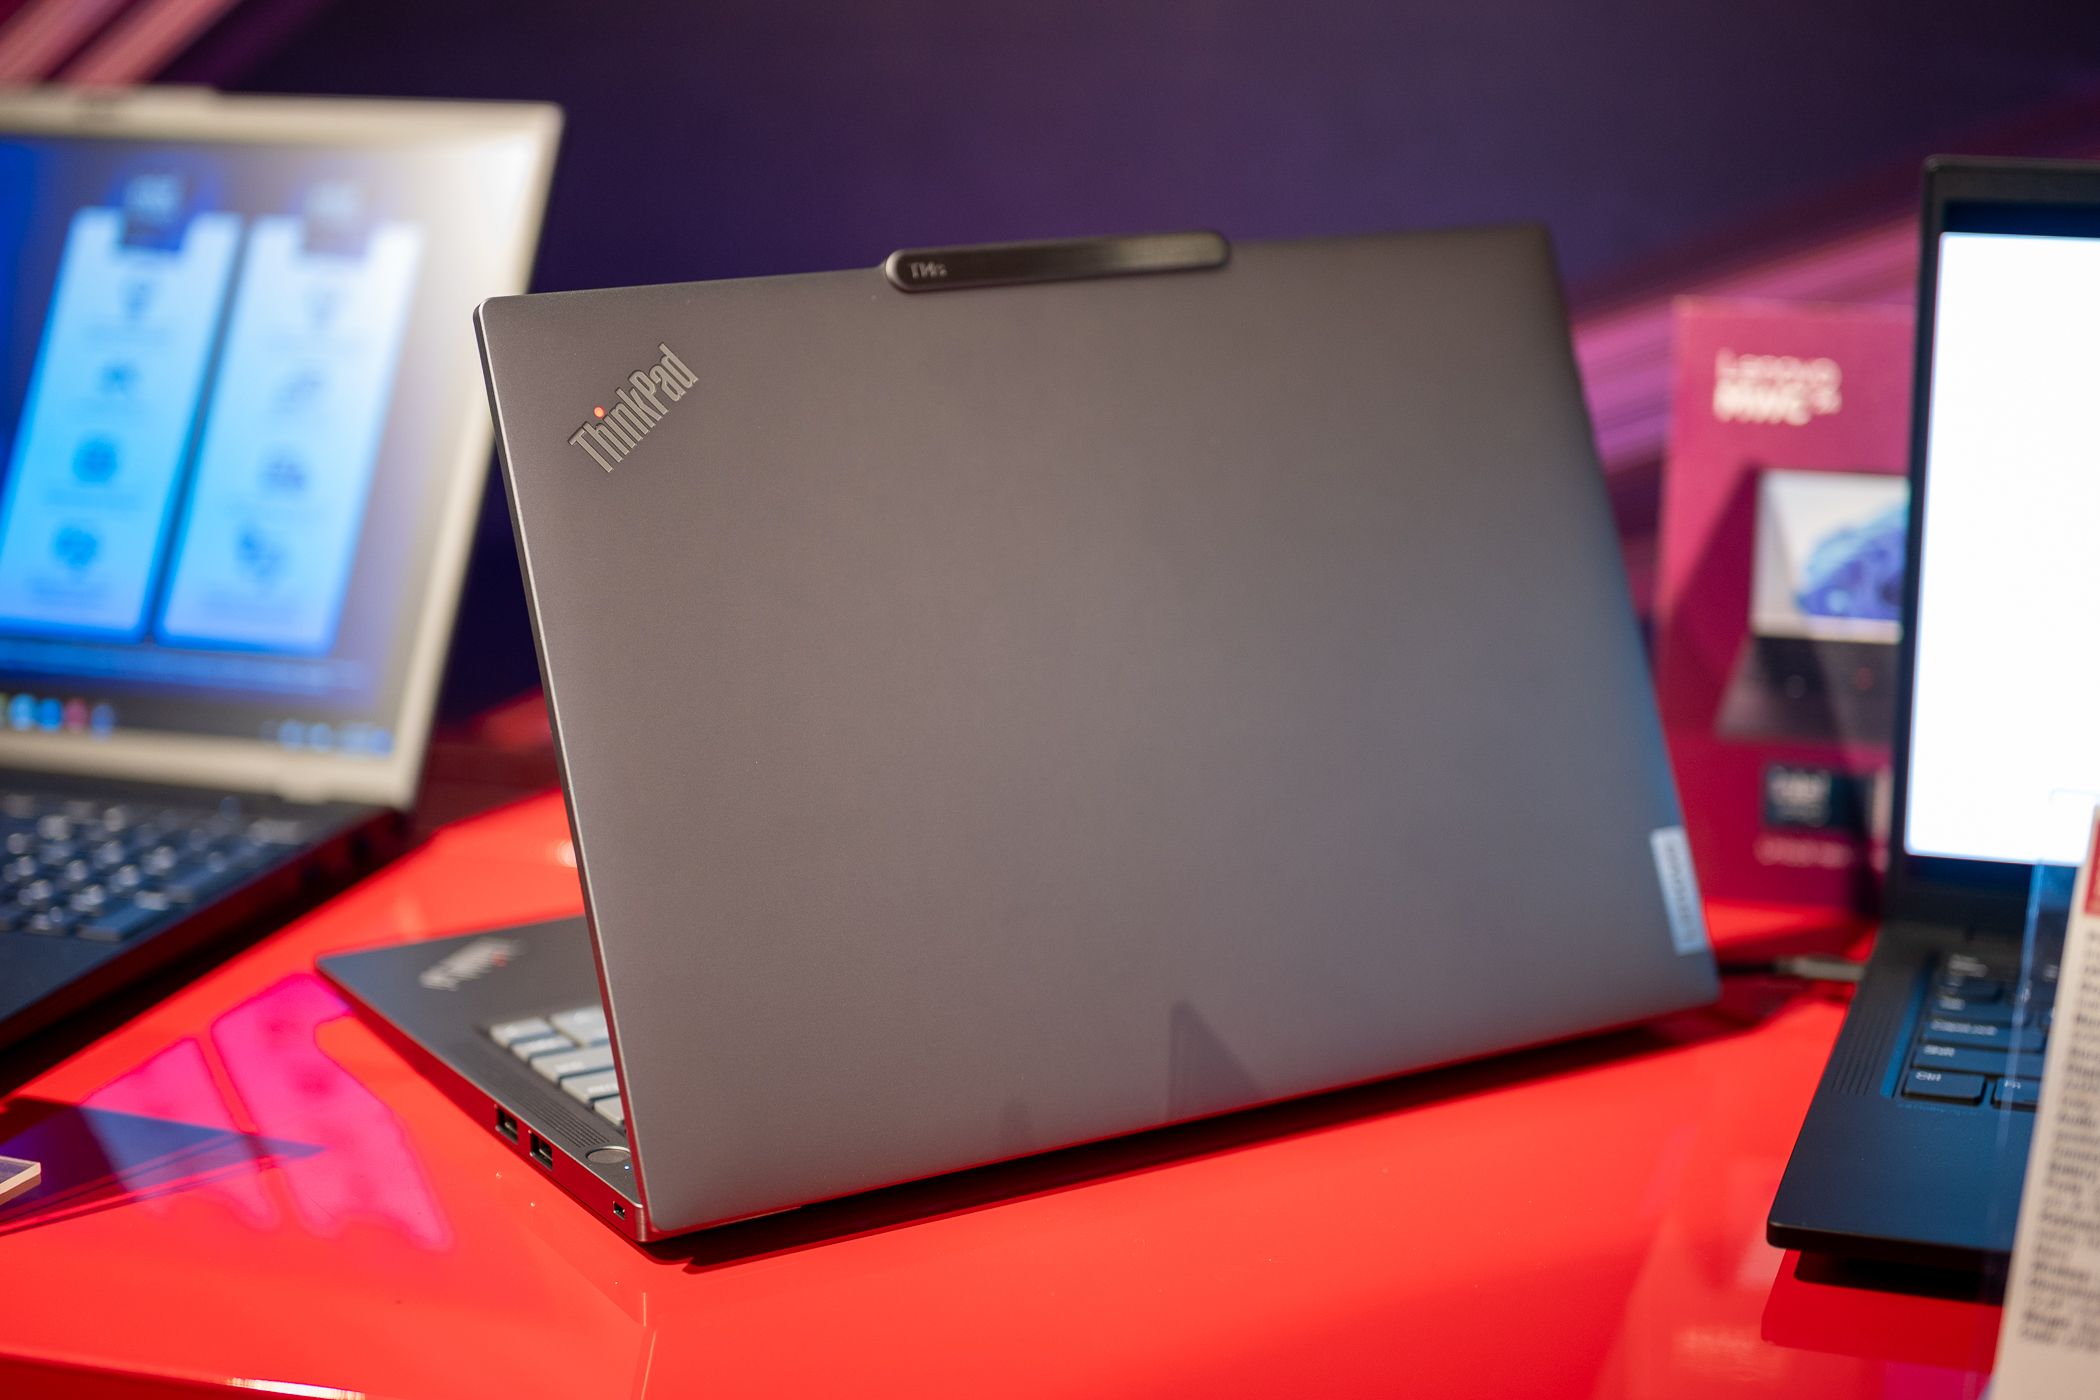 Back side of a Lenovo laptop with the ThinkPad logo visible.